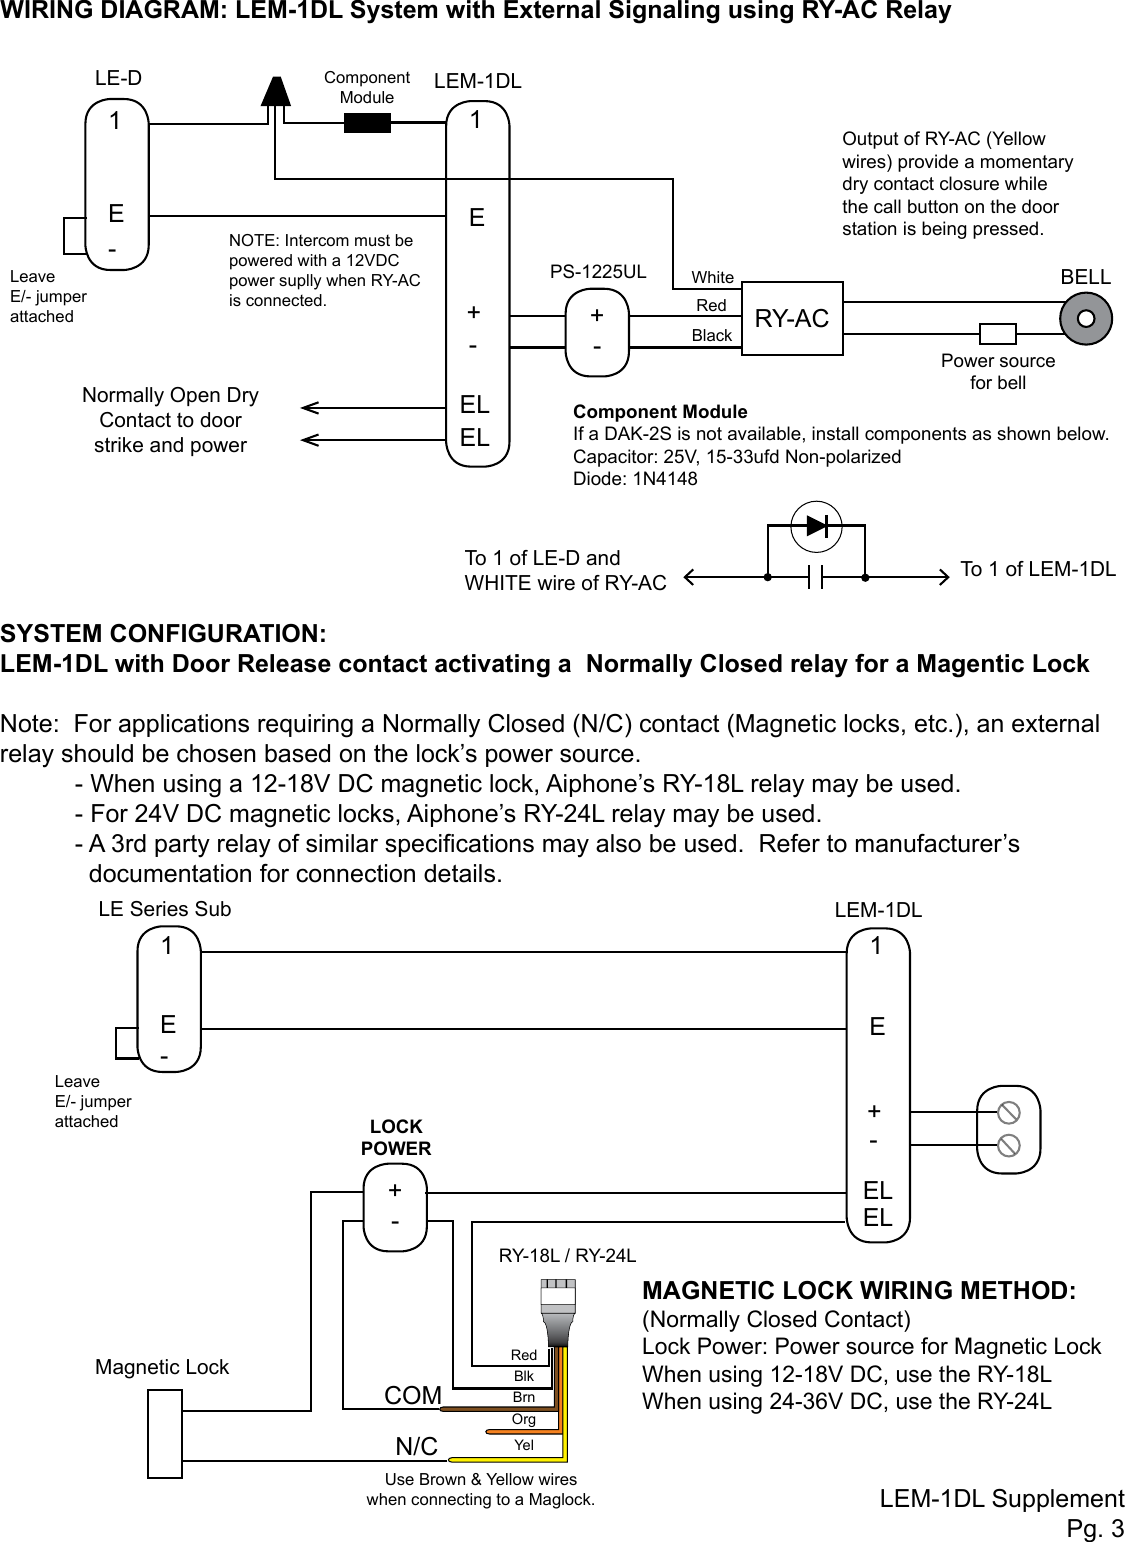 Page 3 of 4 - Aiphone LEM-1DL Instructions